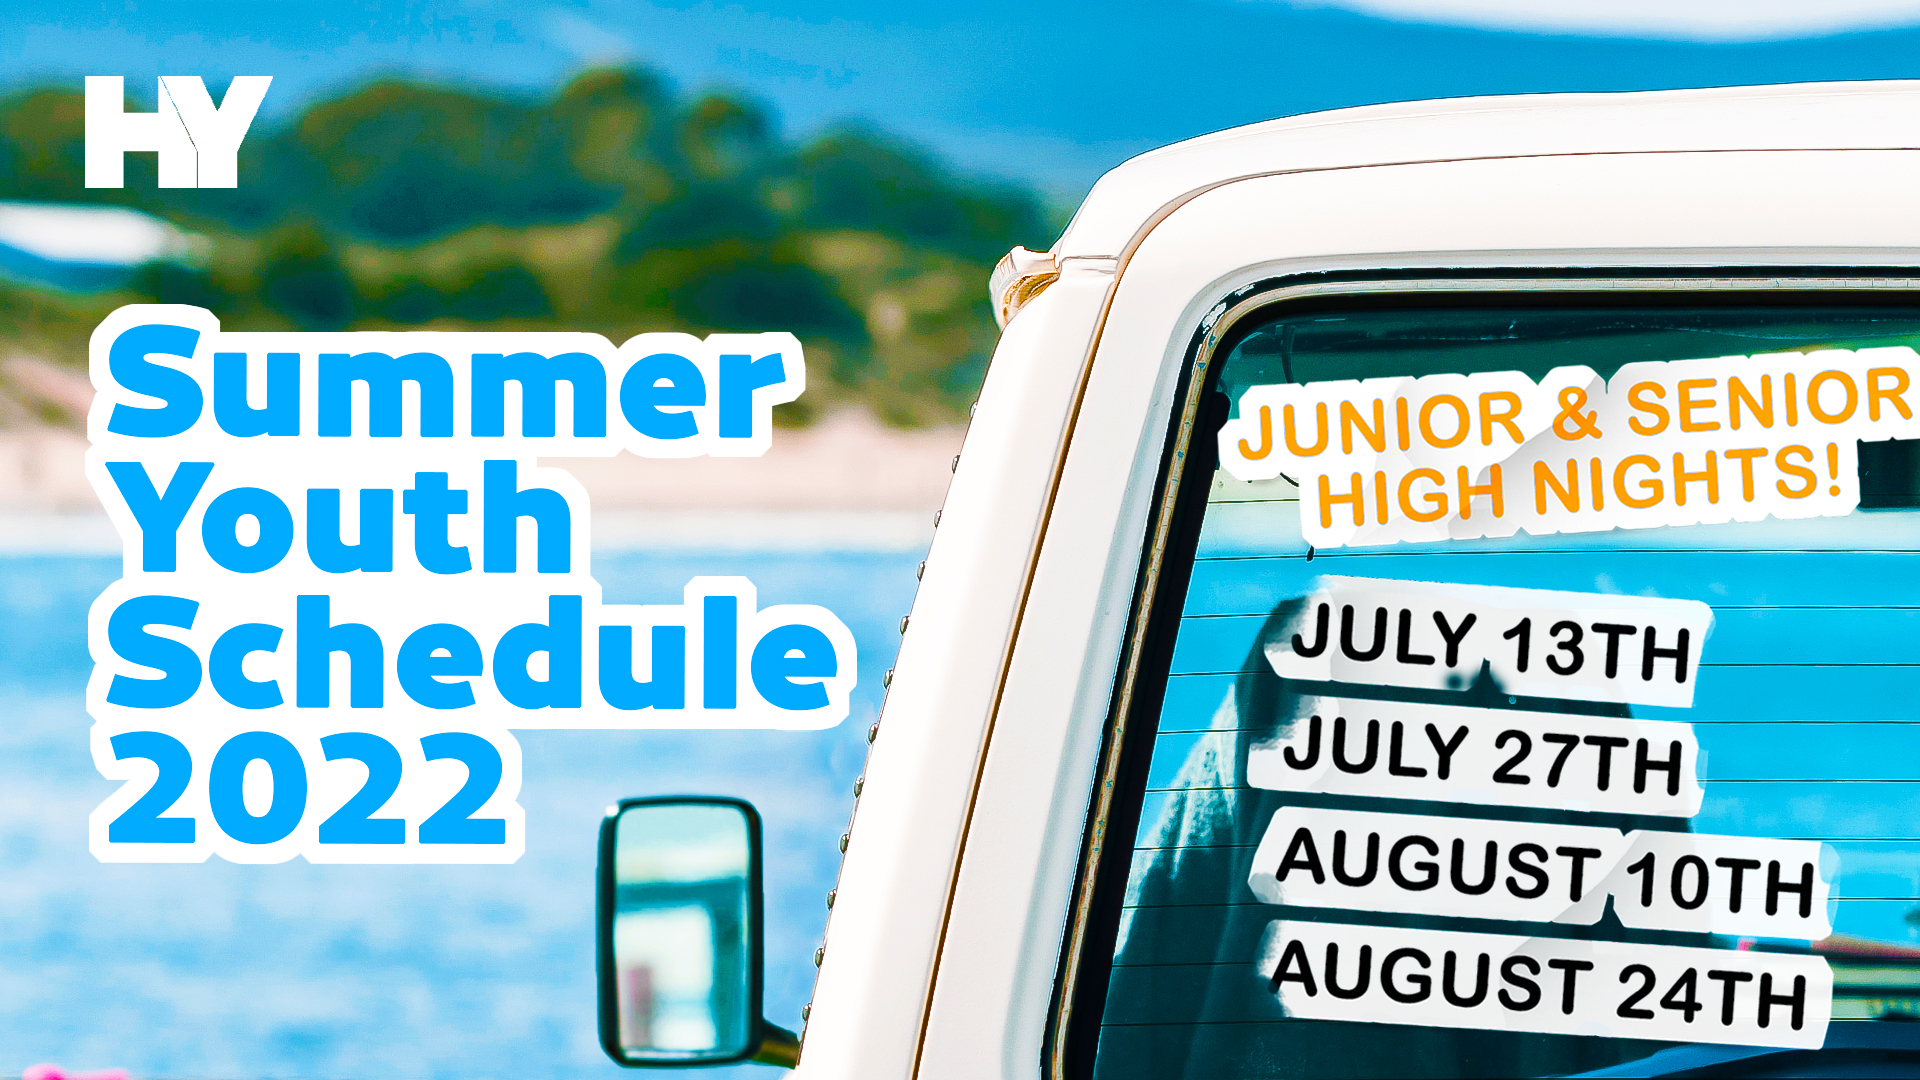 Youth_SummerYouthSchedule_202222